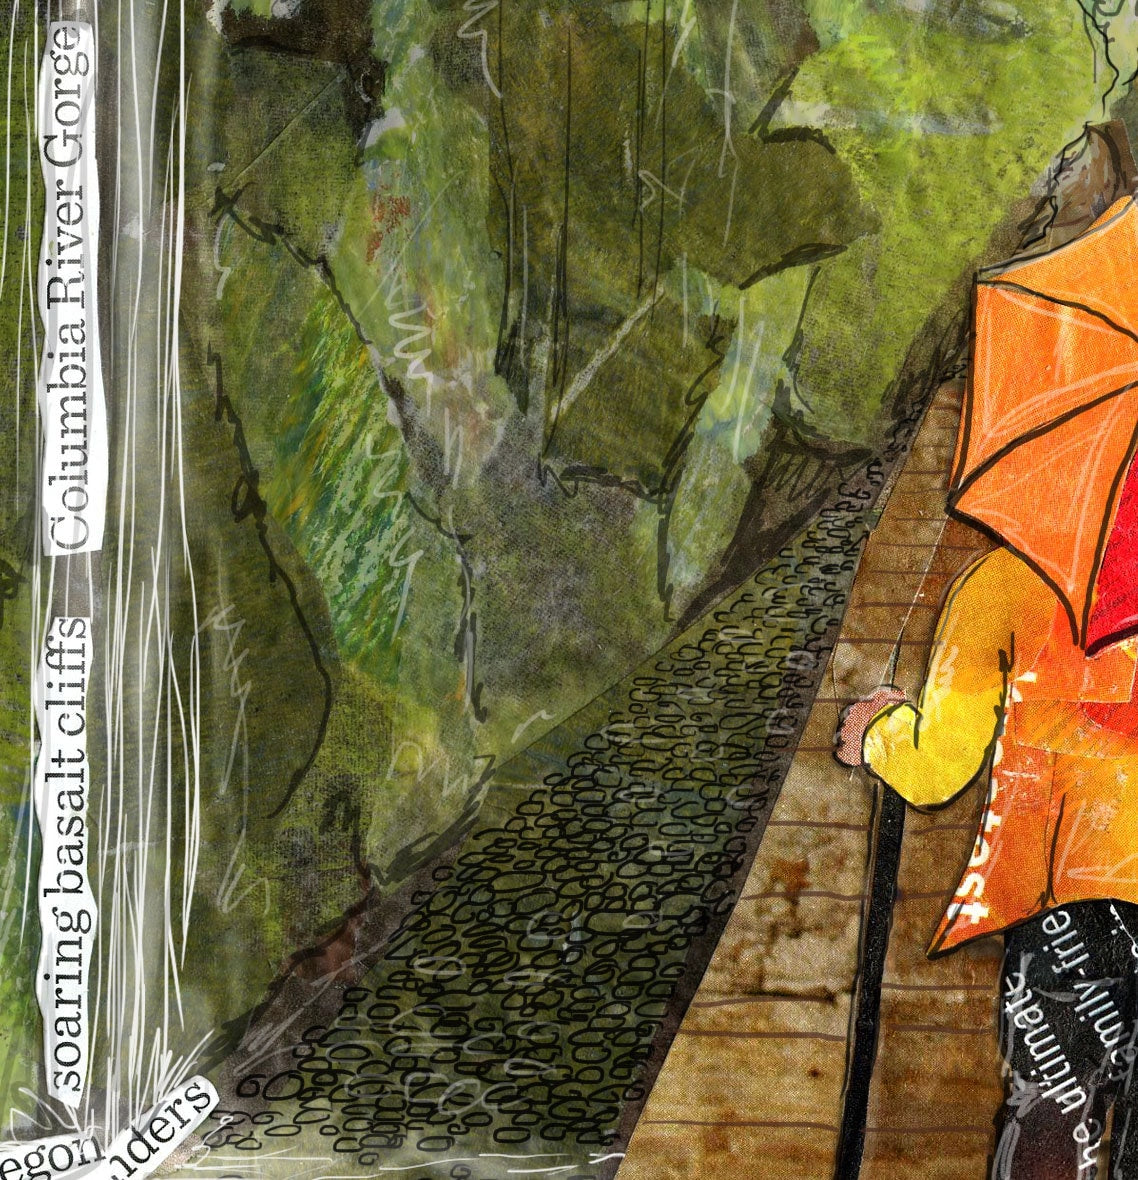 8x10 Art print of a Paper Collage of a Person Hiking in the Rain With and Umbrella in the Columbia River Gorge - Wall Art